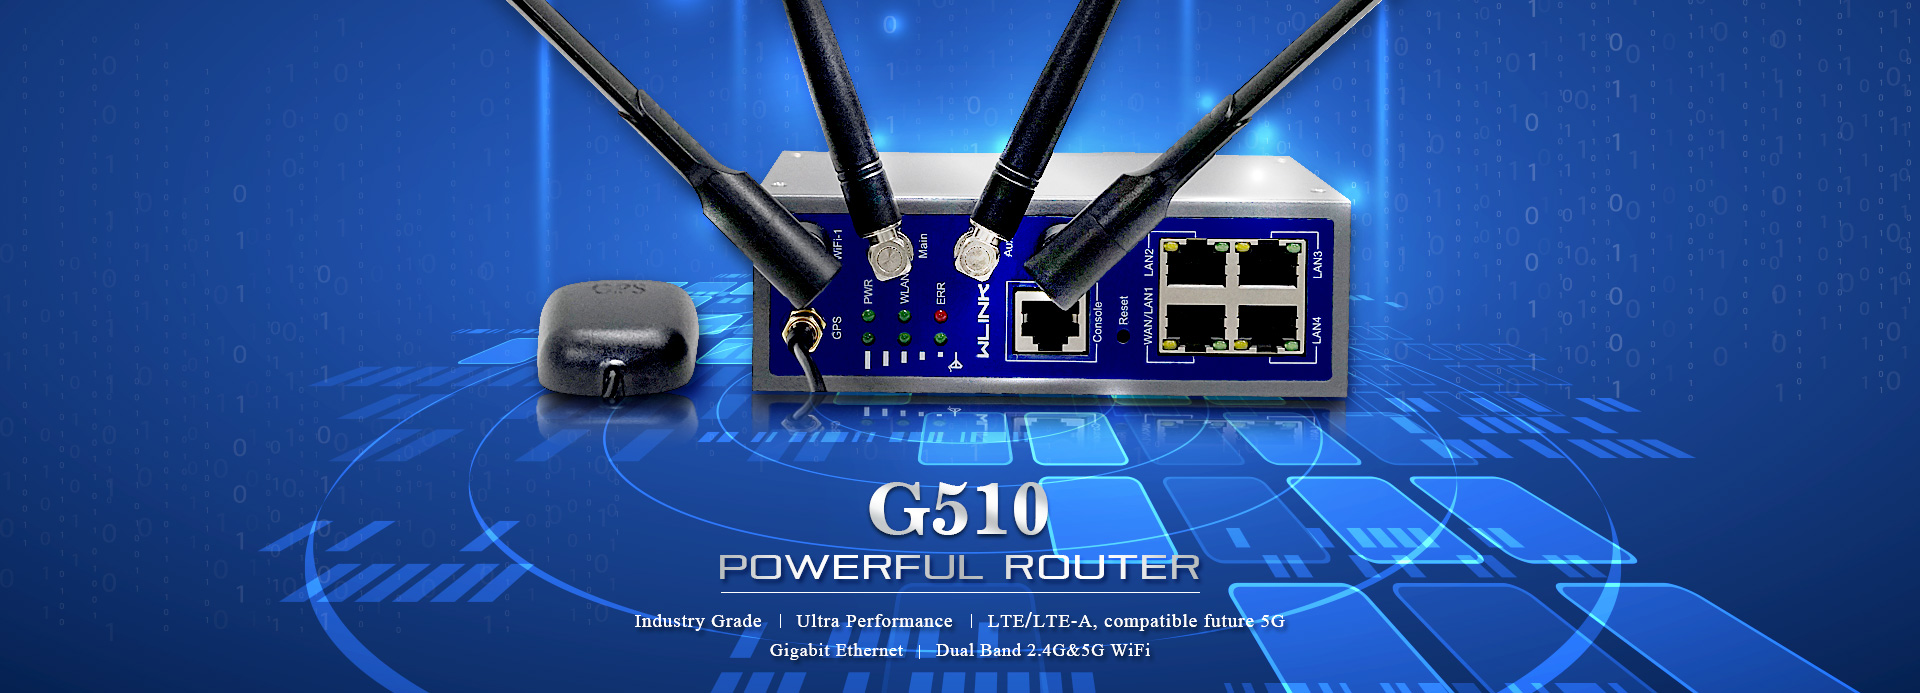 G510 LTE Router